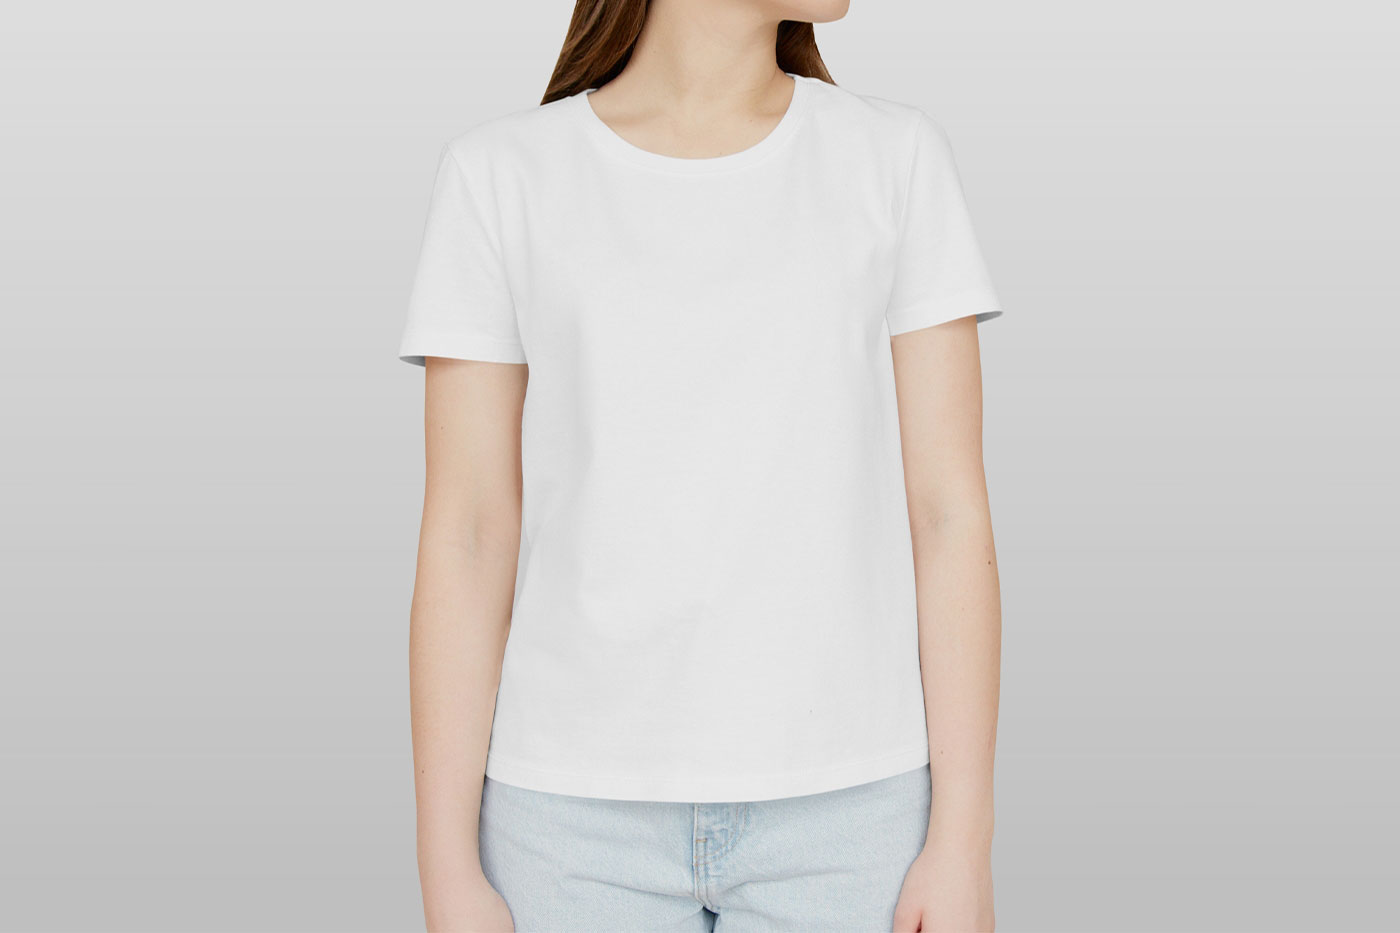 Front View of Standing Woman with T-shirt Mockup FREE PSD